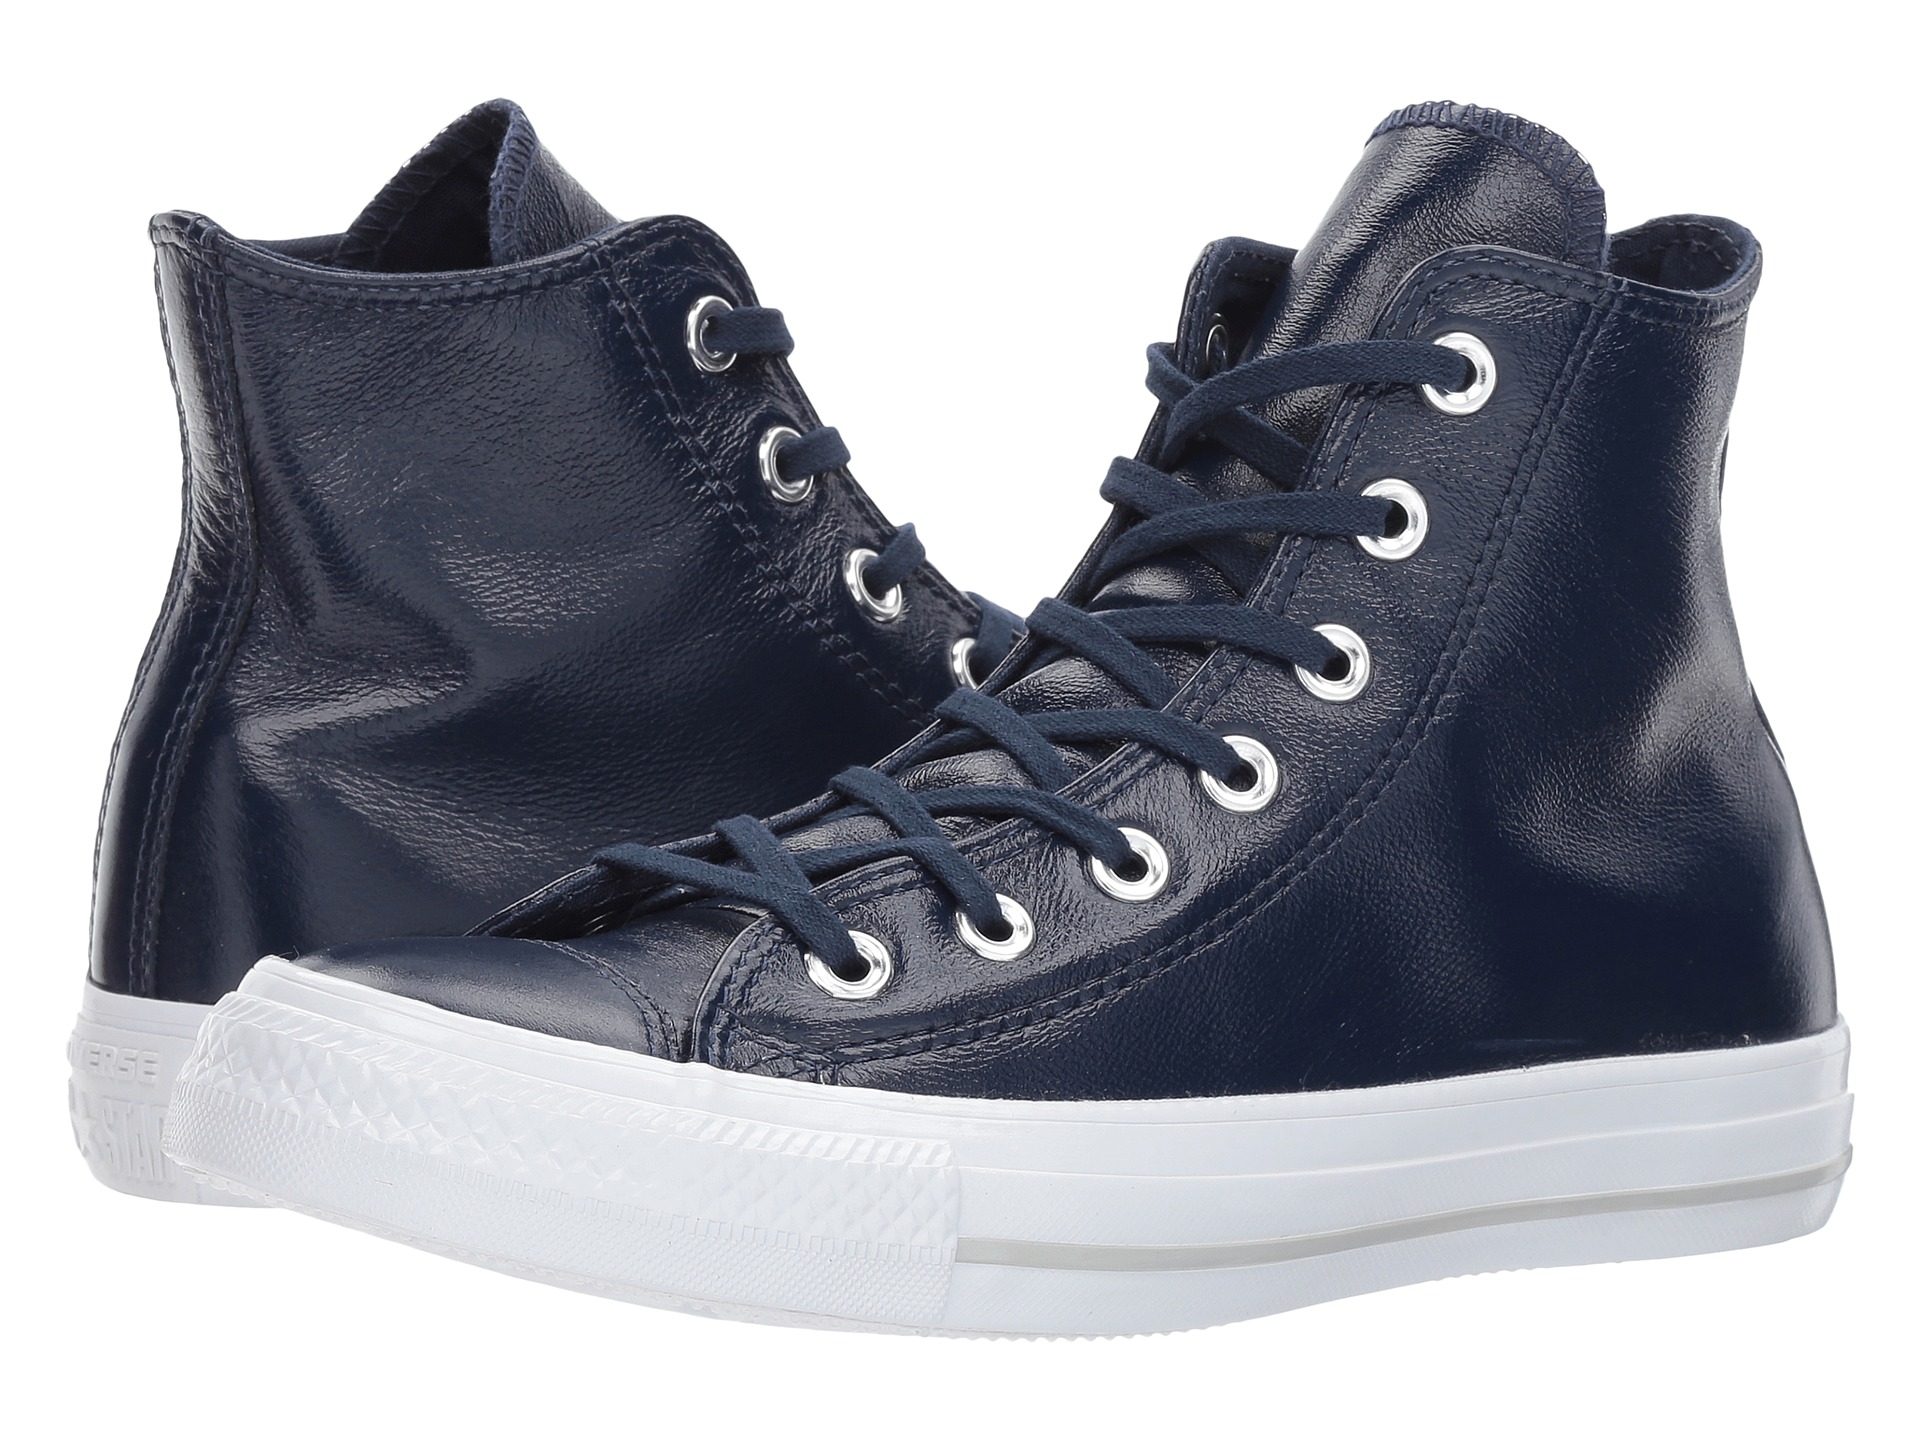 Converse Chuck Taylor® All Star® Crinkled Patent Leather Hi at Zappos.com